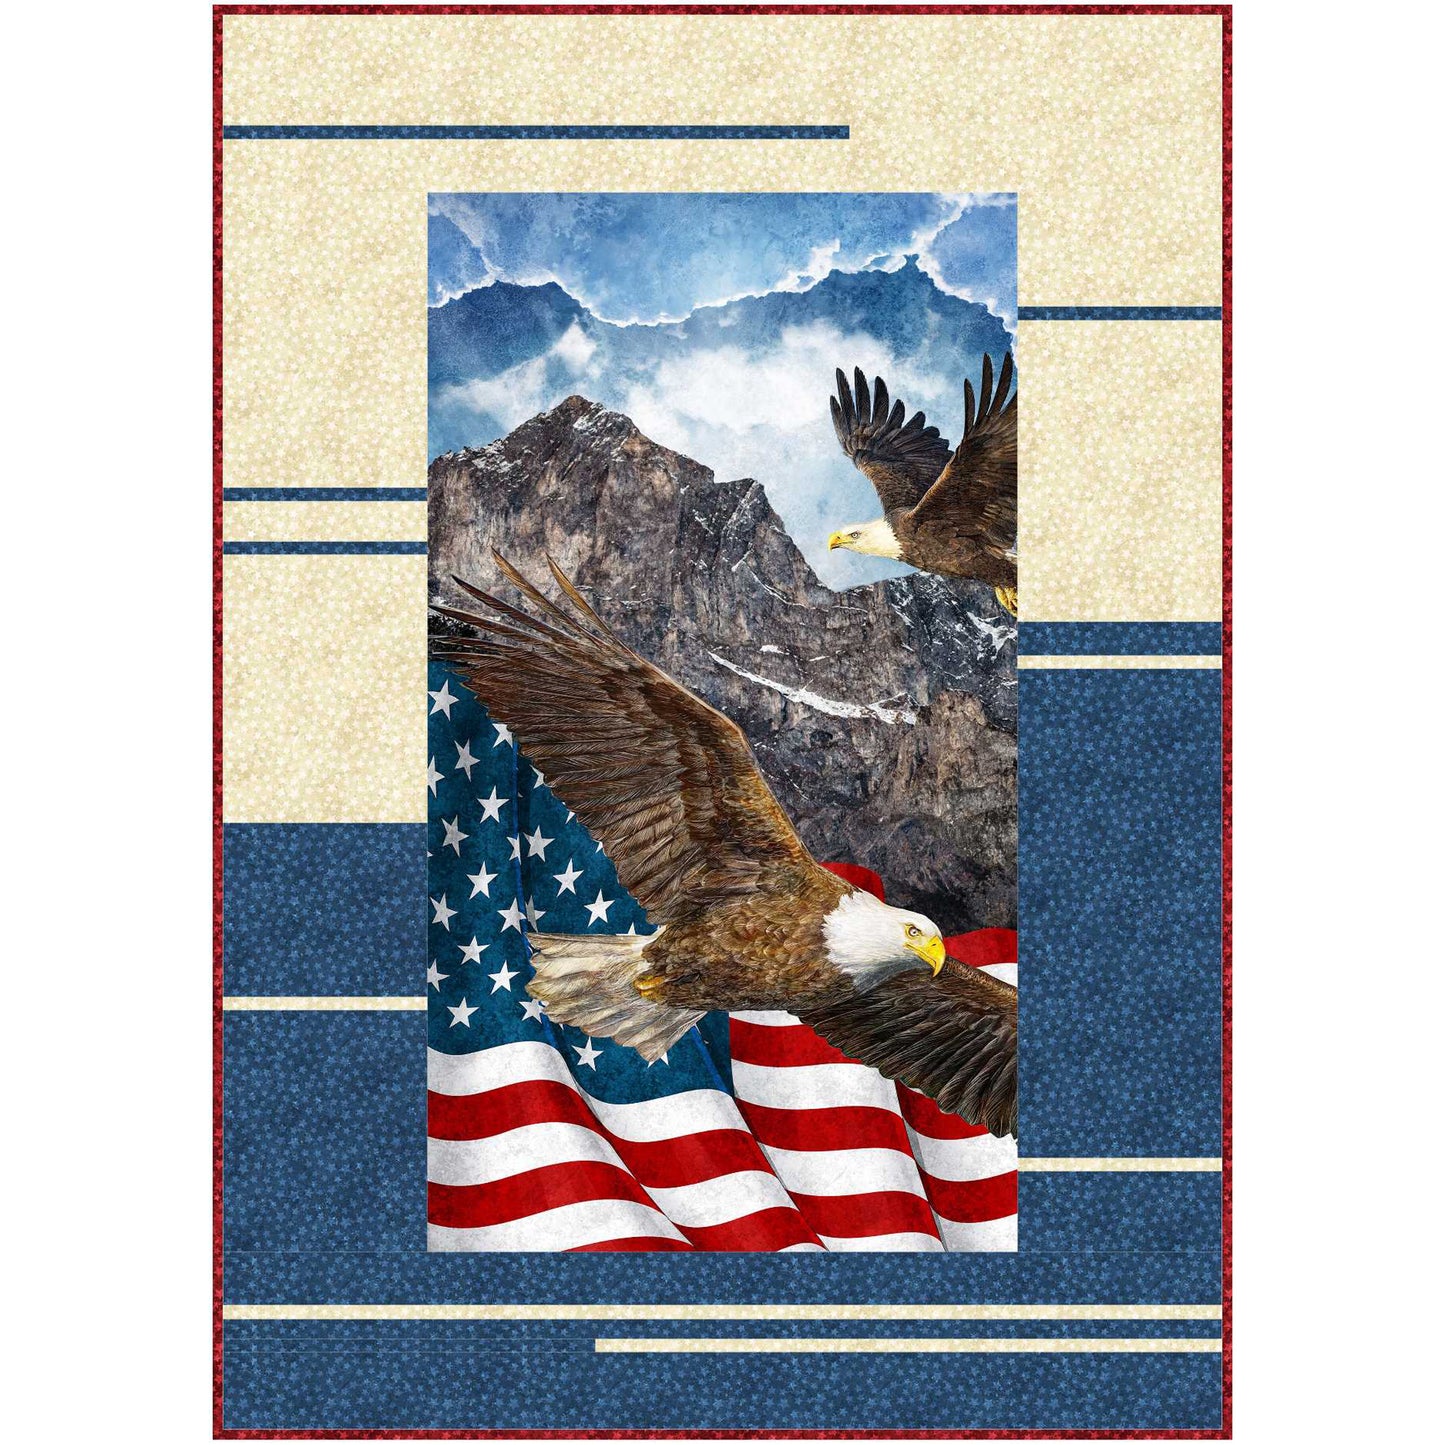 Eagle and American flag quilt featuring patriotic design with red, white, and blue colors and very basic lines to let the image shine.